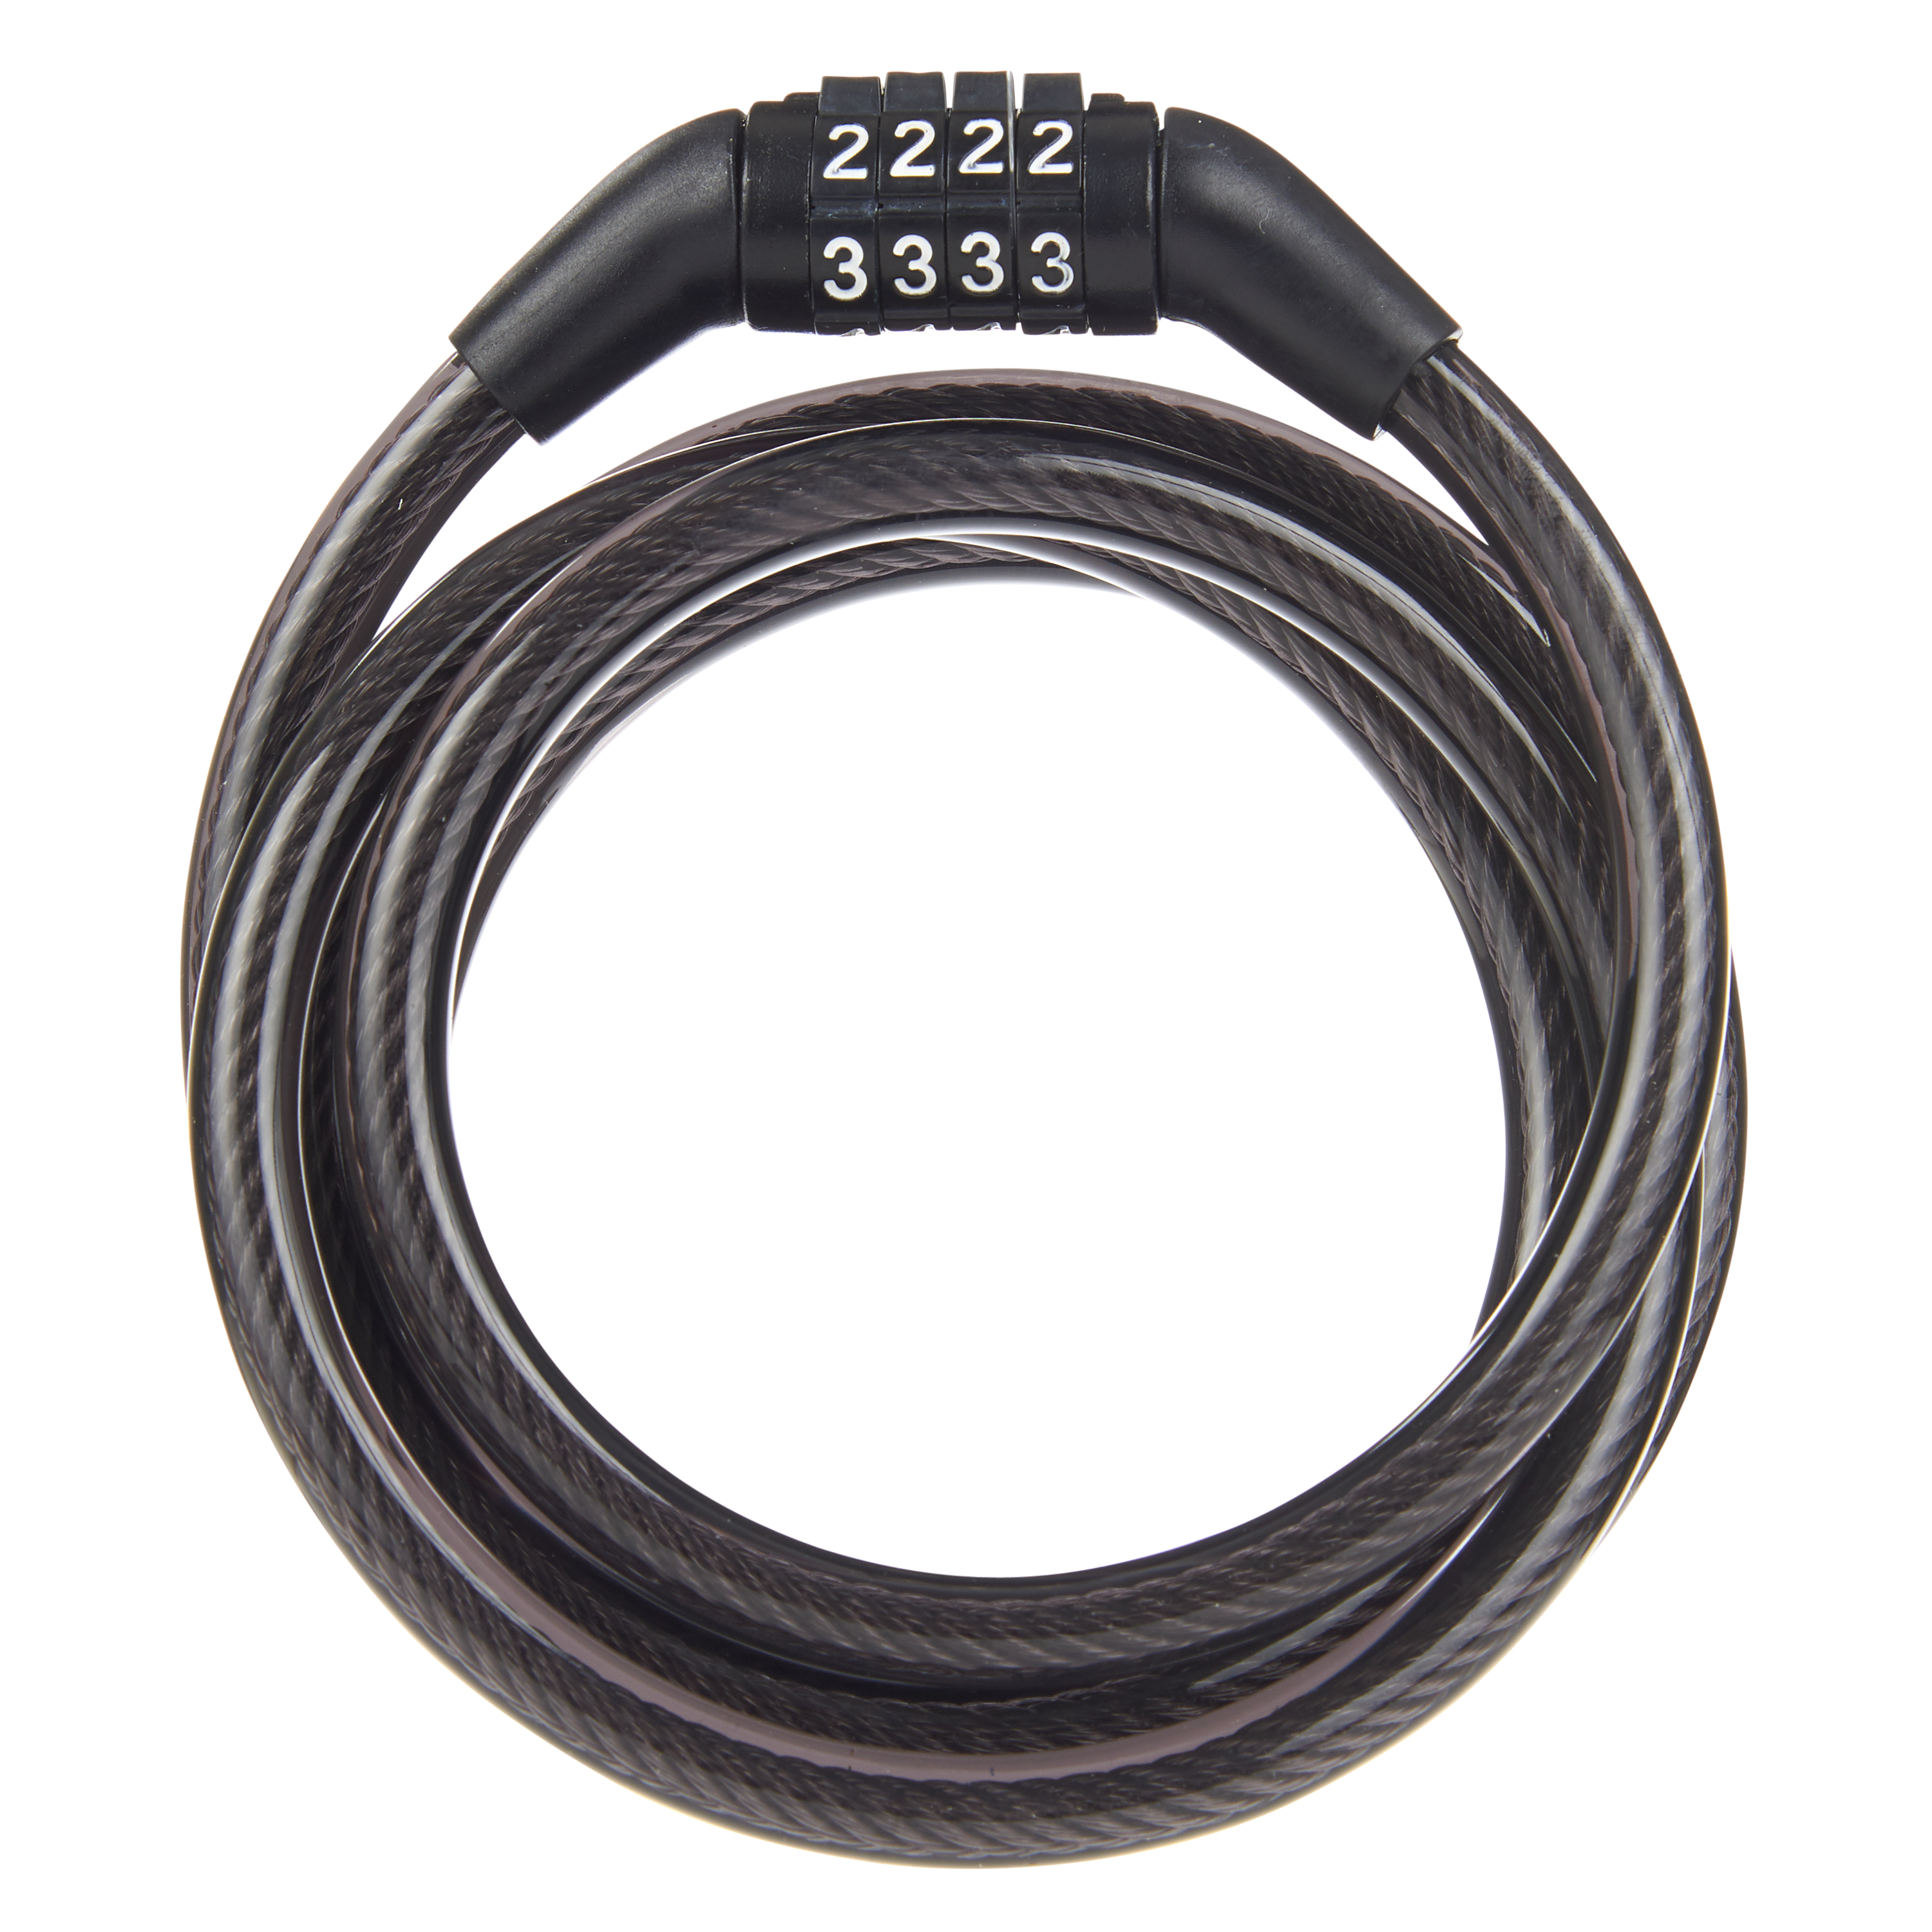 Flexible Steel Combination Cable Lock for Cycling